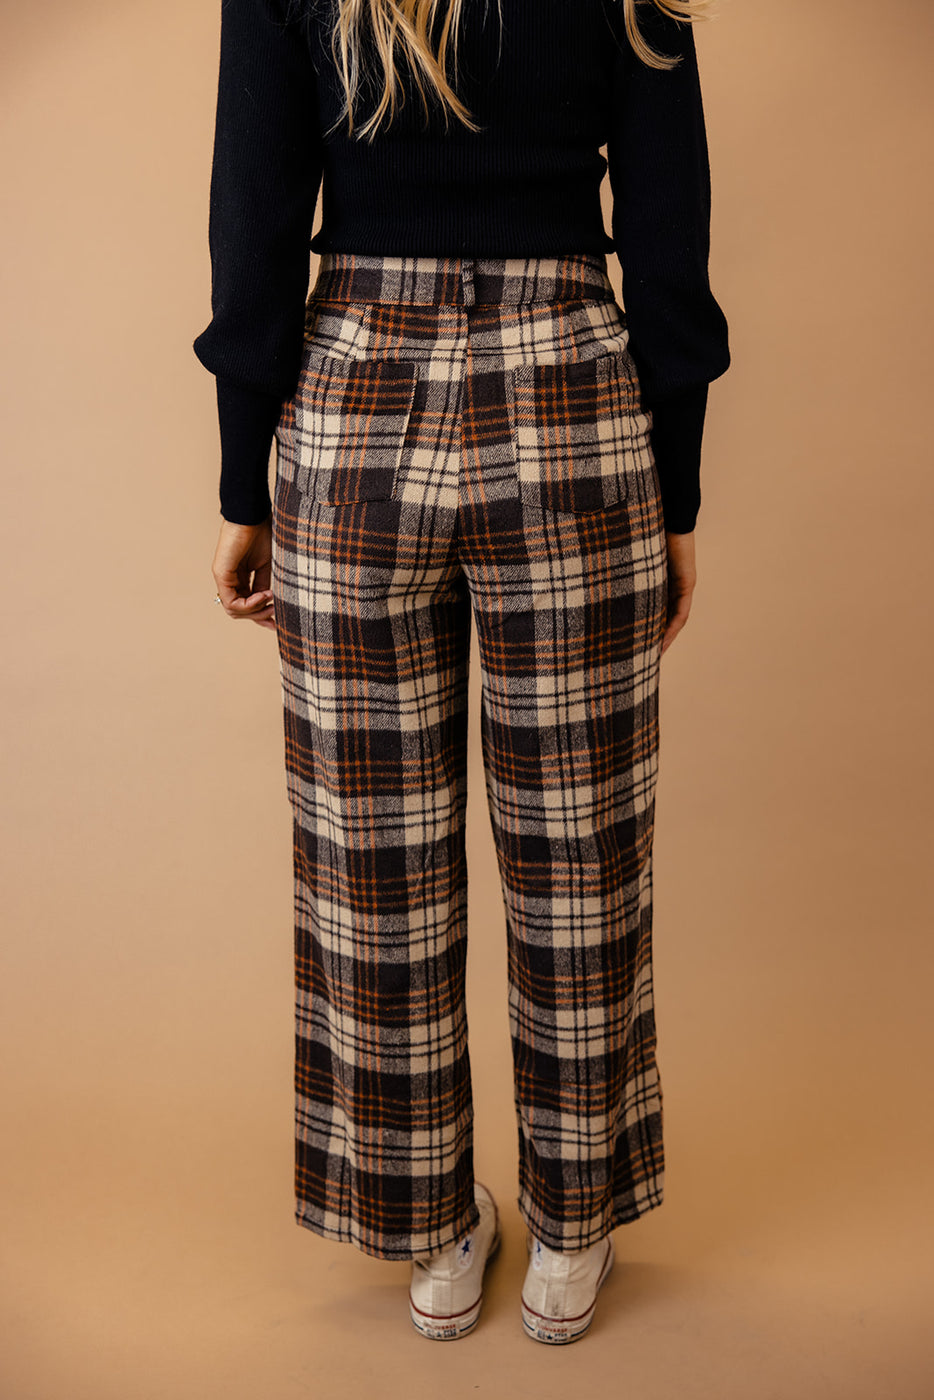 Can I Wear Plaid Pants To The Office?